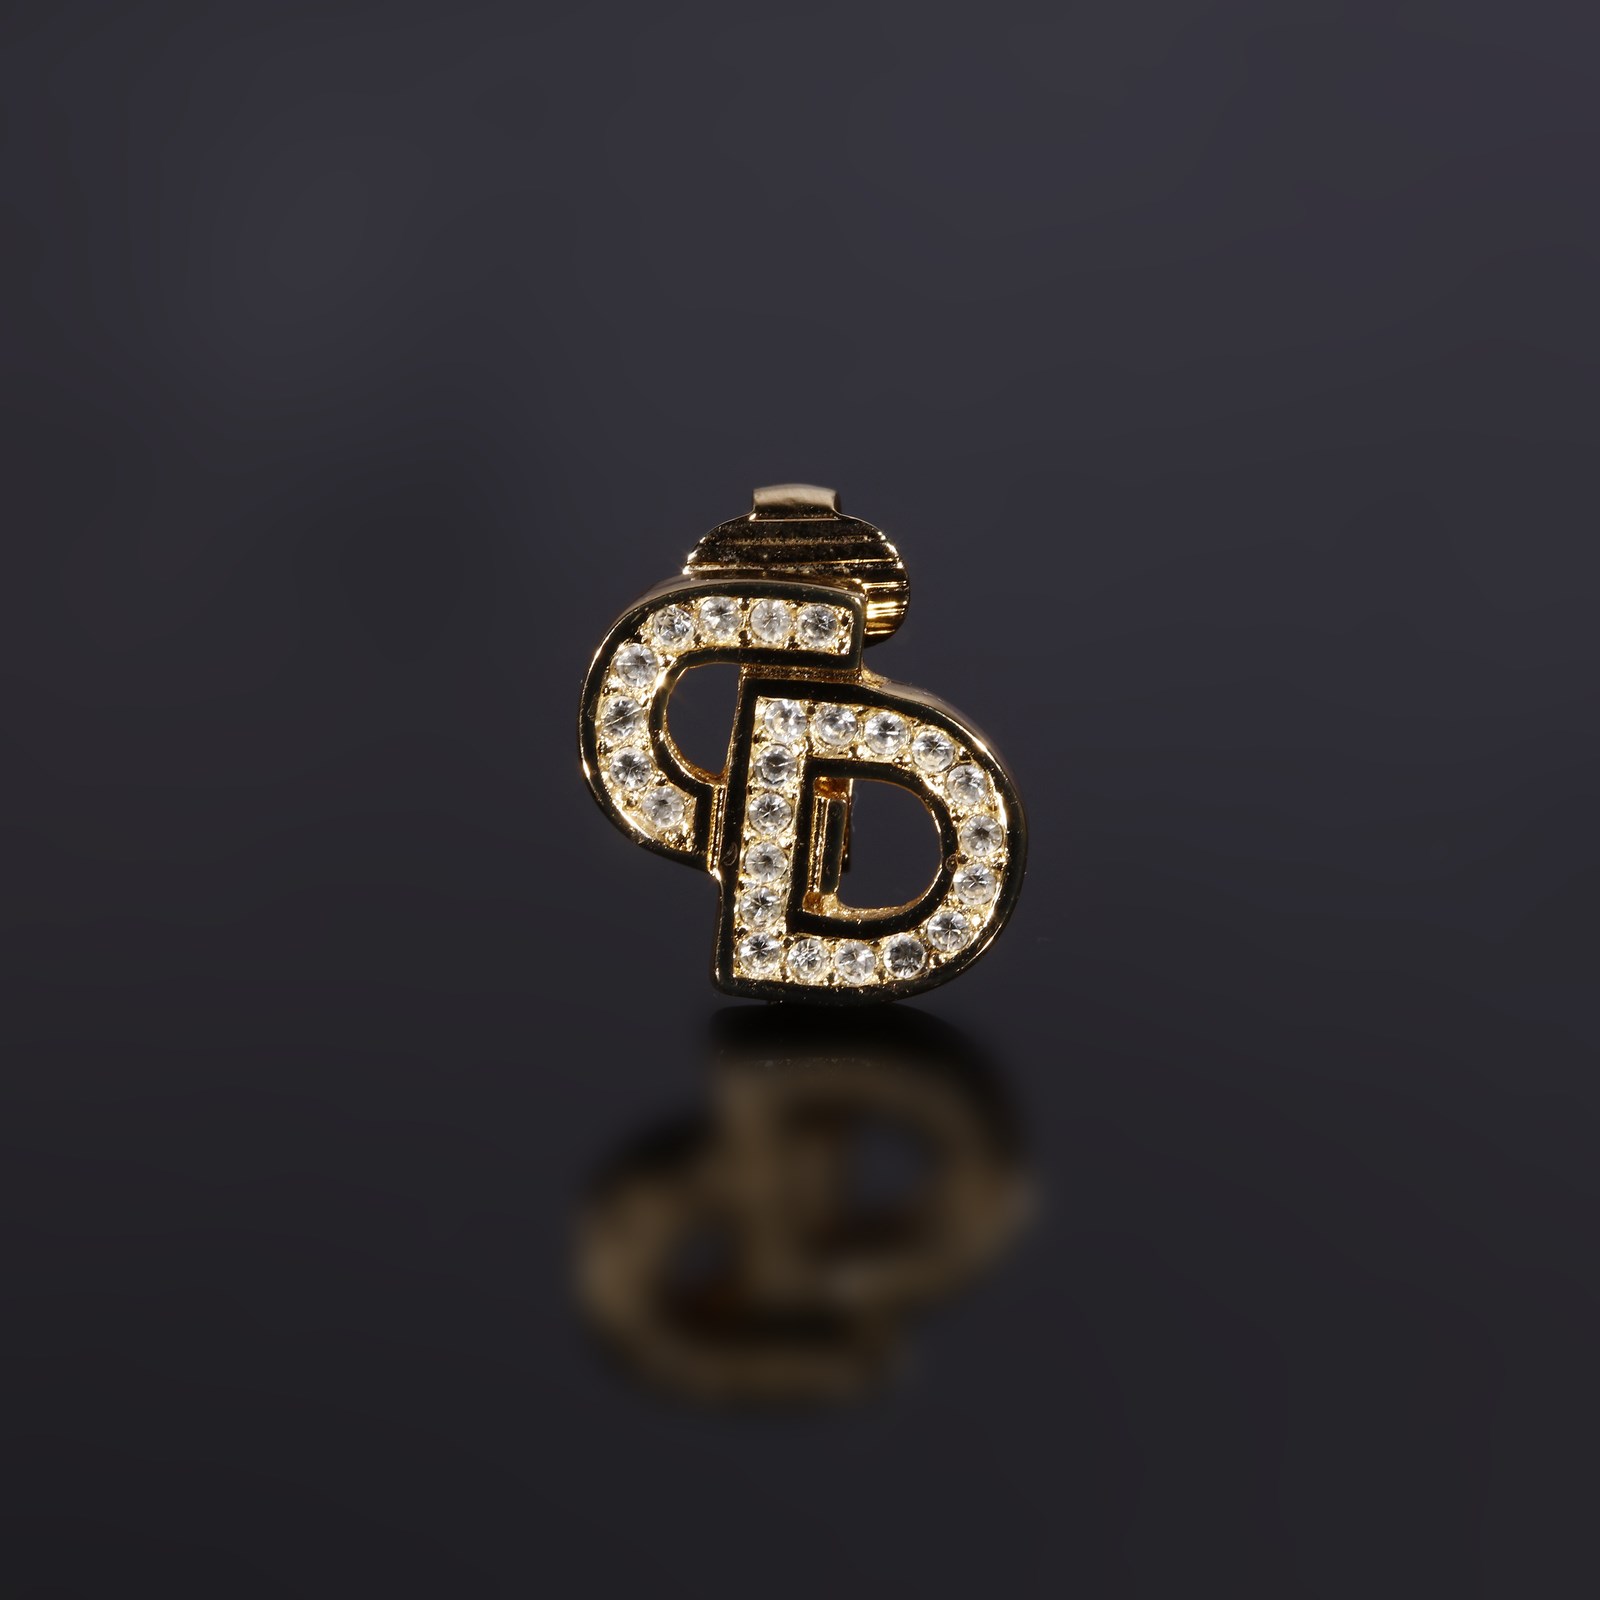 Clip earrings with CD initials. (Christian Dior)